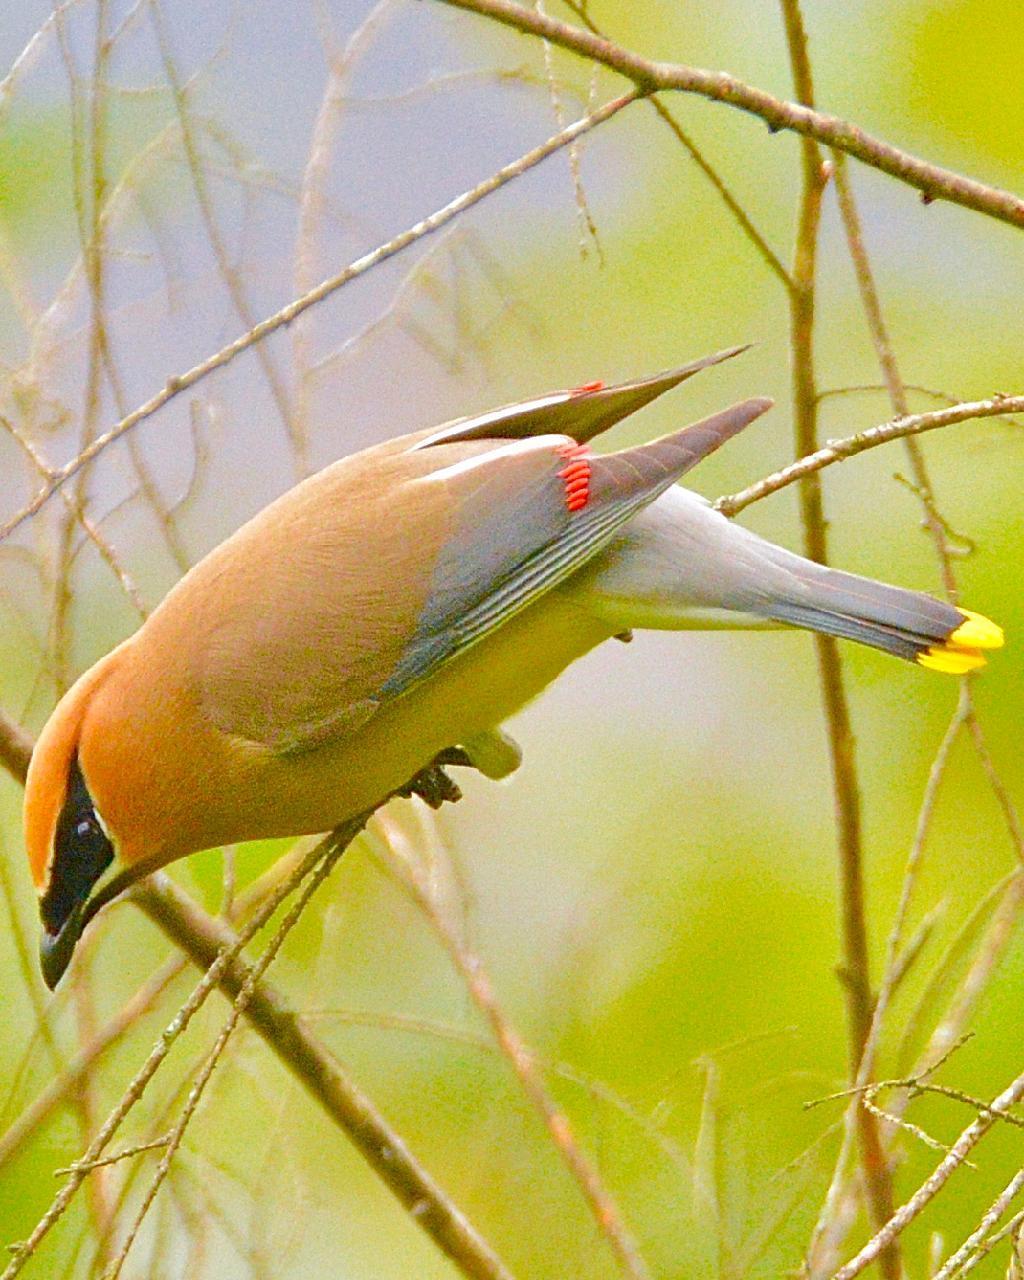 Cedar Waxwing Photo by Brian Avent